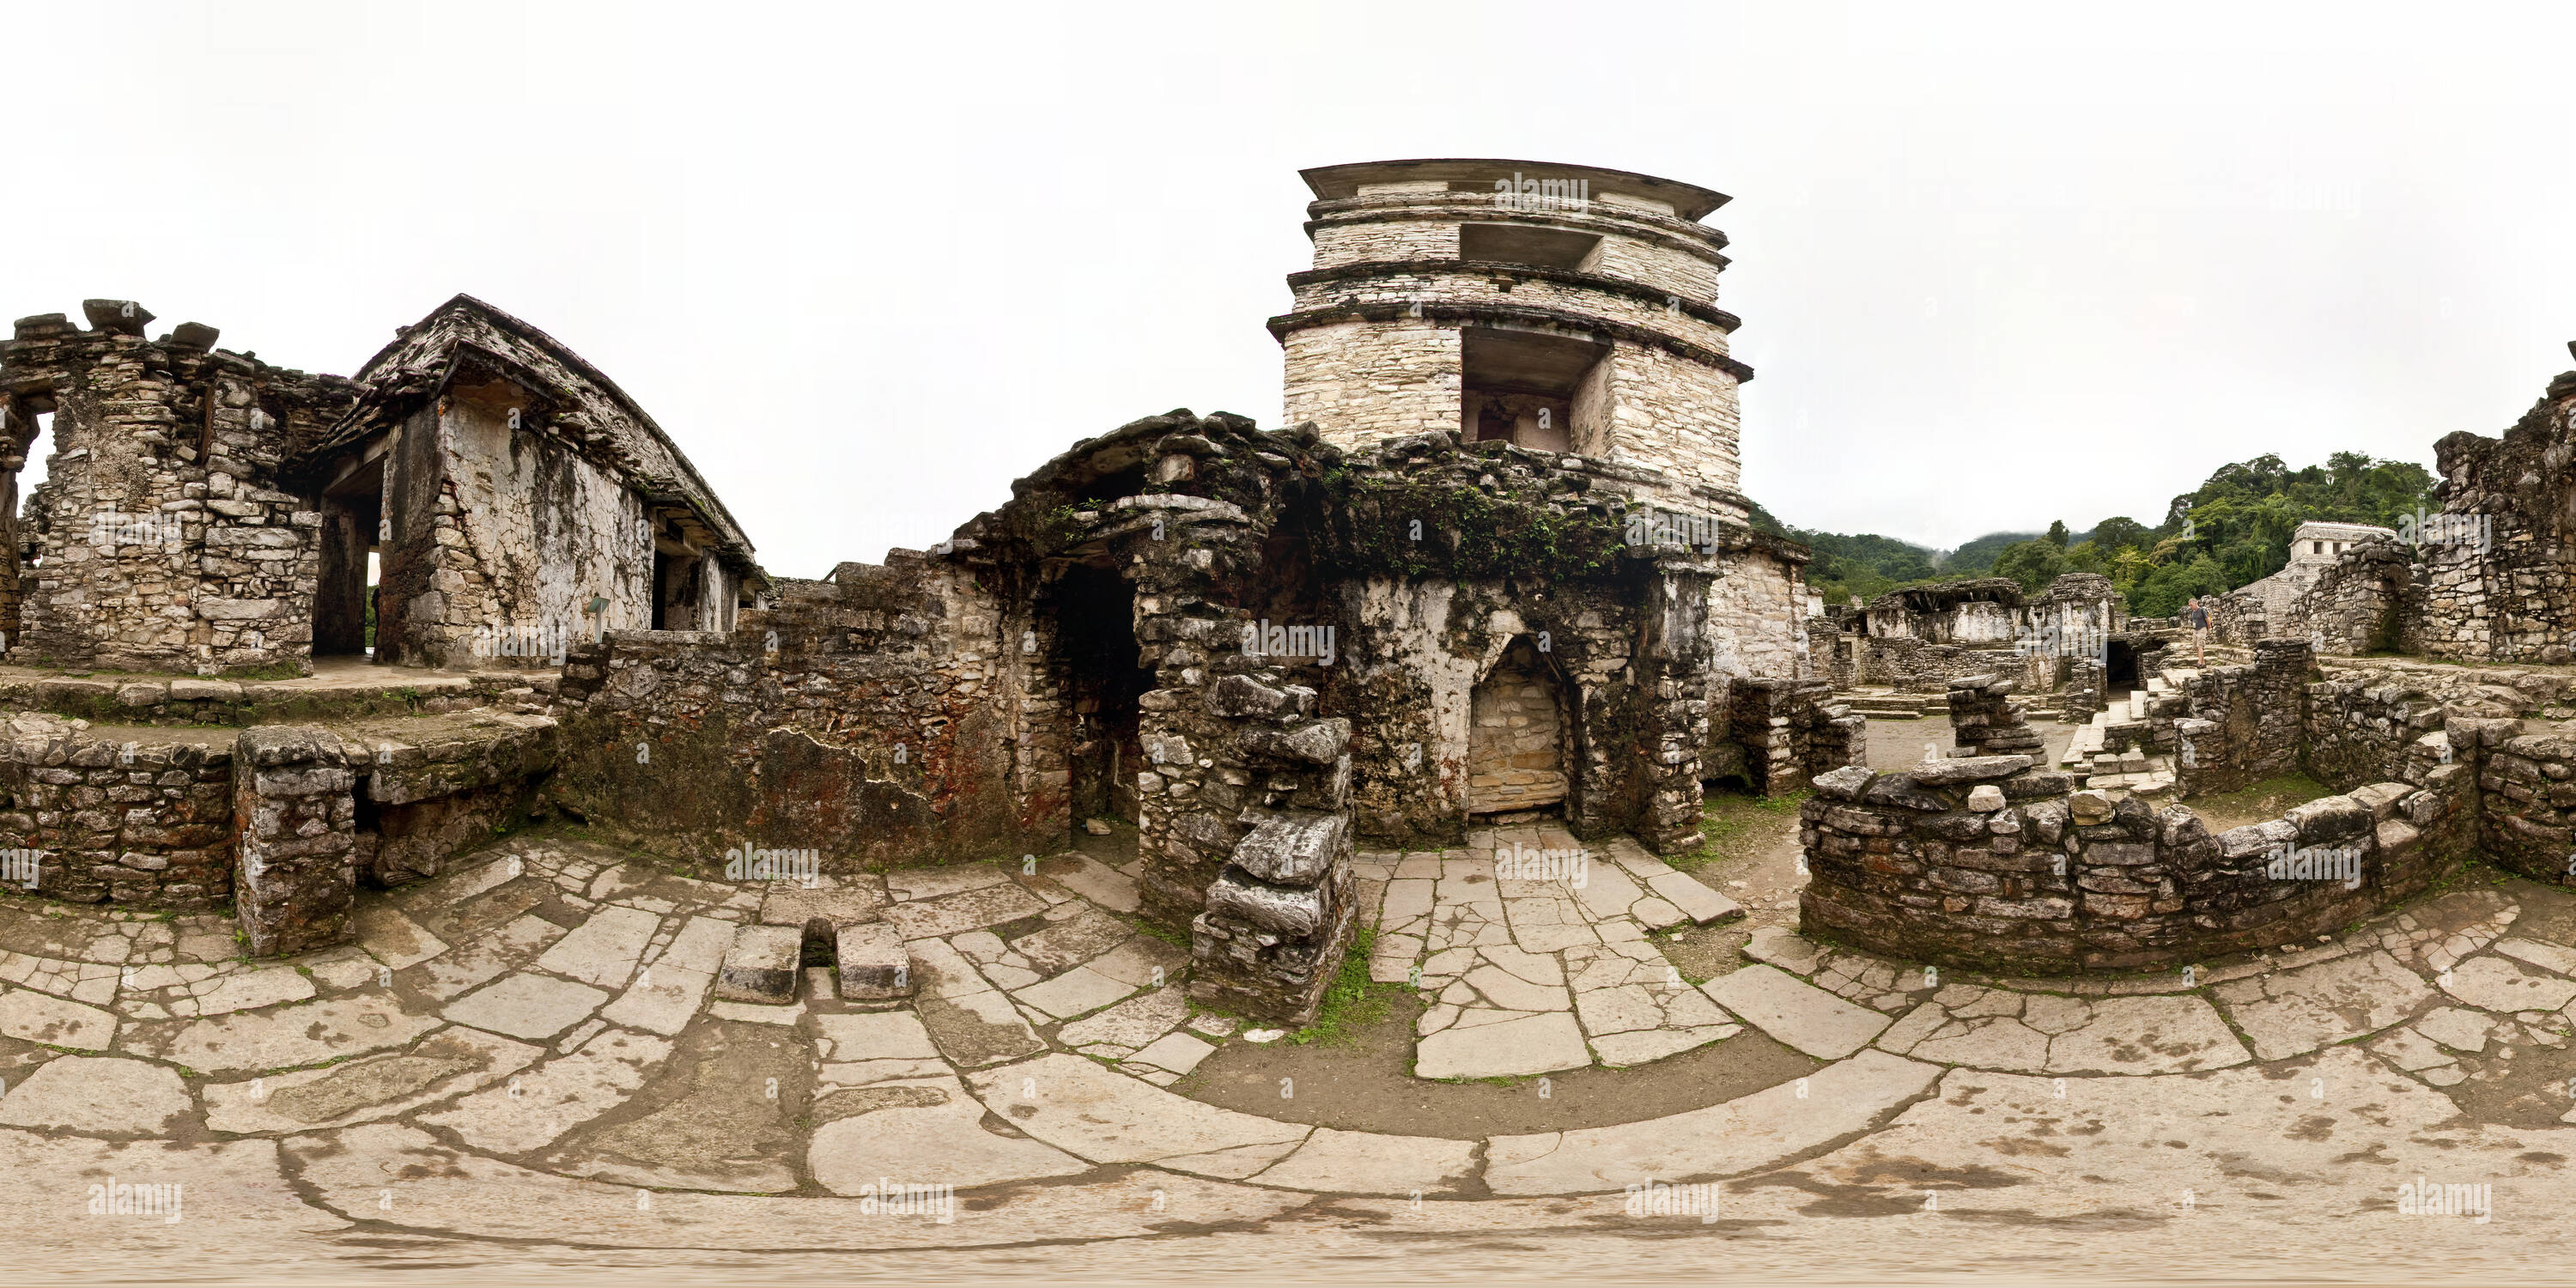 360 degree panoramic view of At the Palace in Palenque